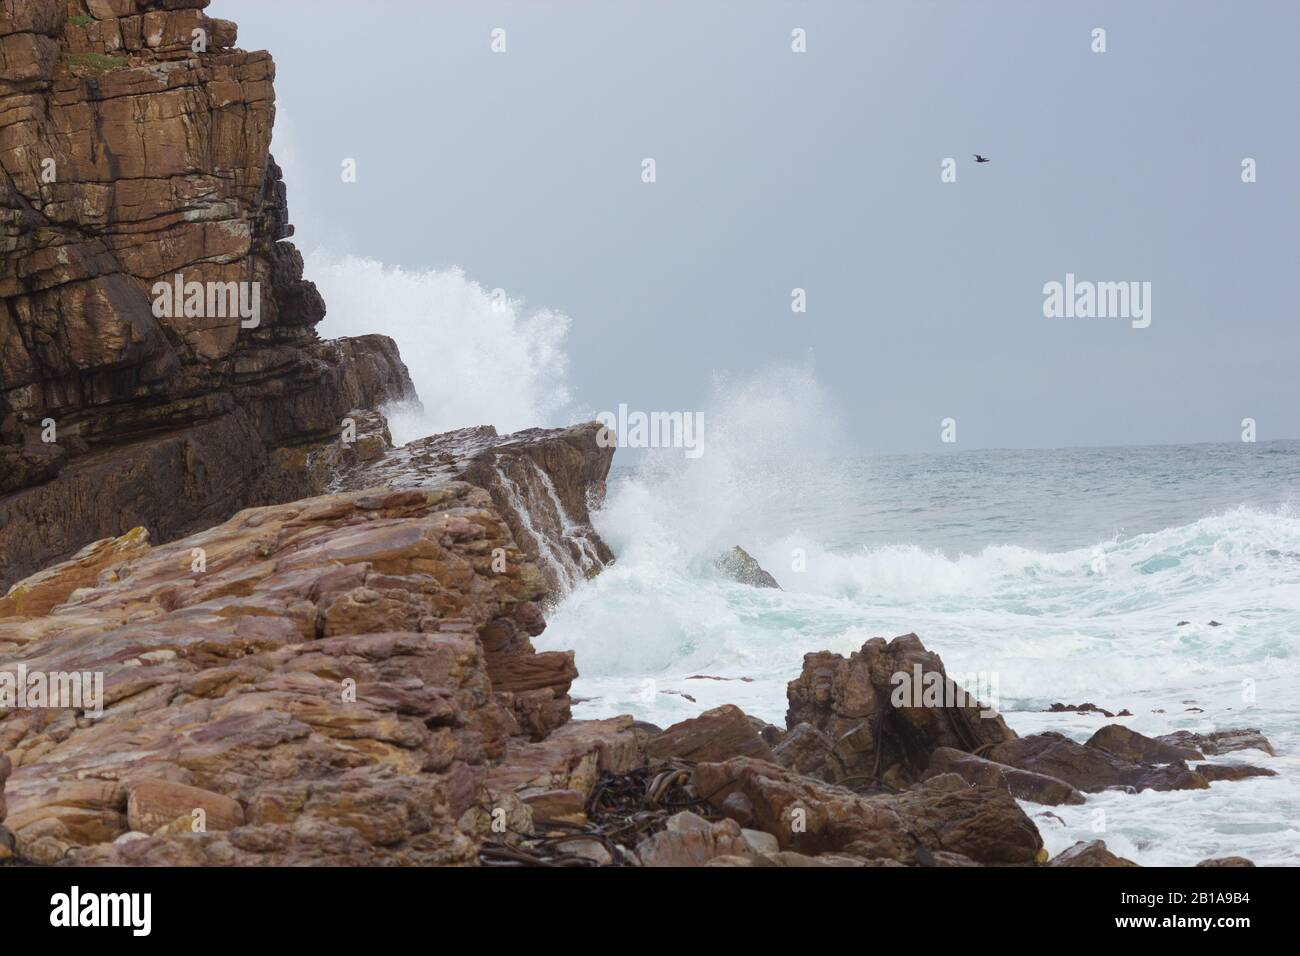 Cape of Good Hope, Western Cape, Cape Town, South Africa Stock Photo